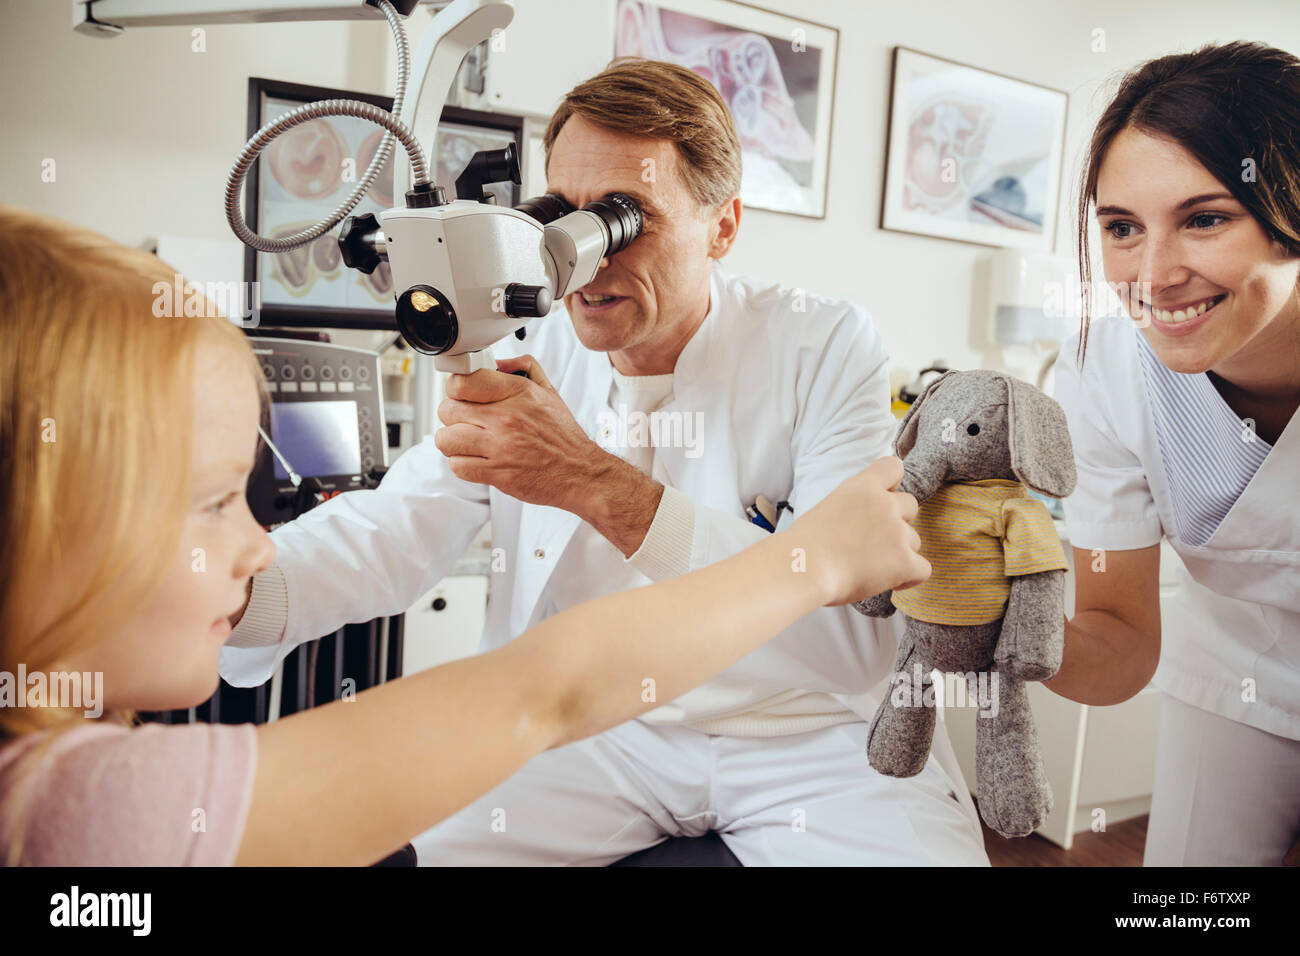 Nurse distracting child with toy while doctor using surgical microscope to check ears Stock Photo